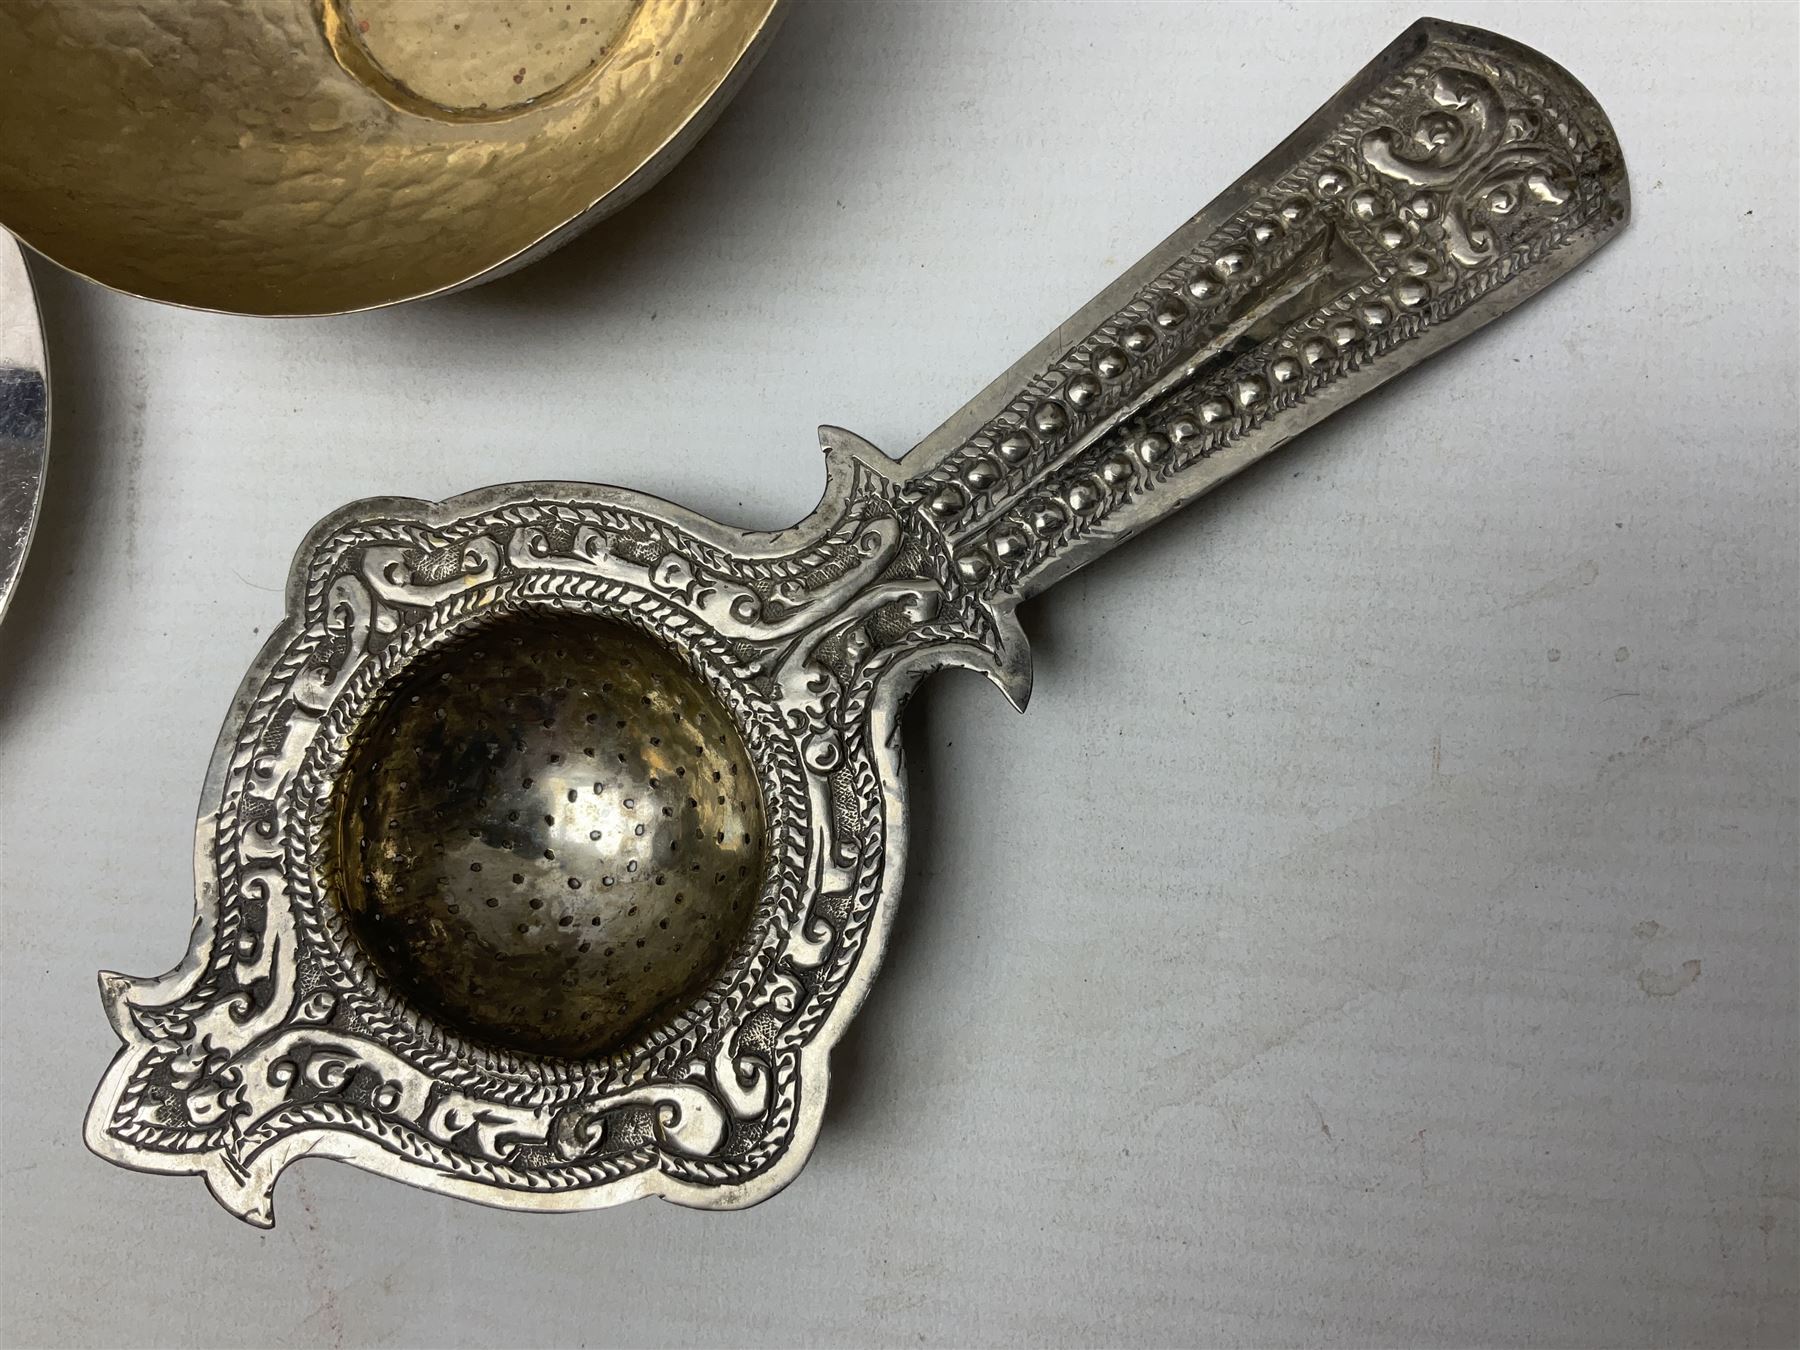 Yerba mate tea gourd calabash cup with silver-plated foliate mounts raised upon three hoof feet - Image 2 of 11